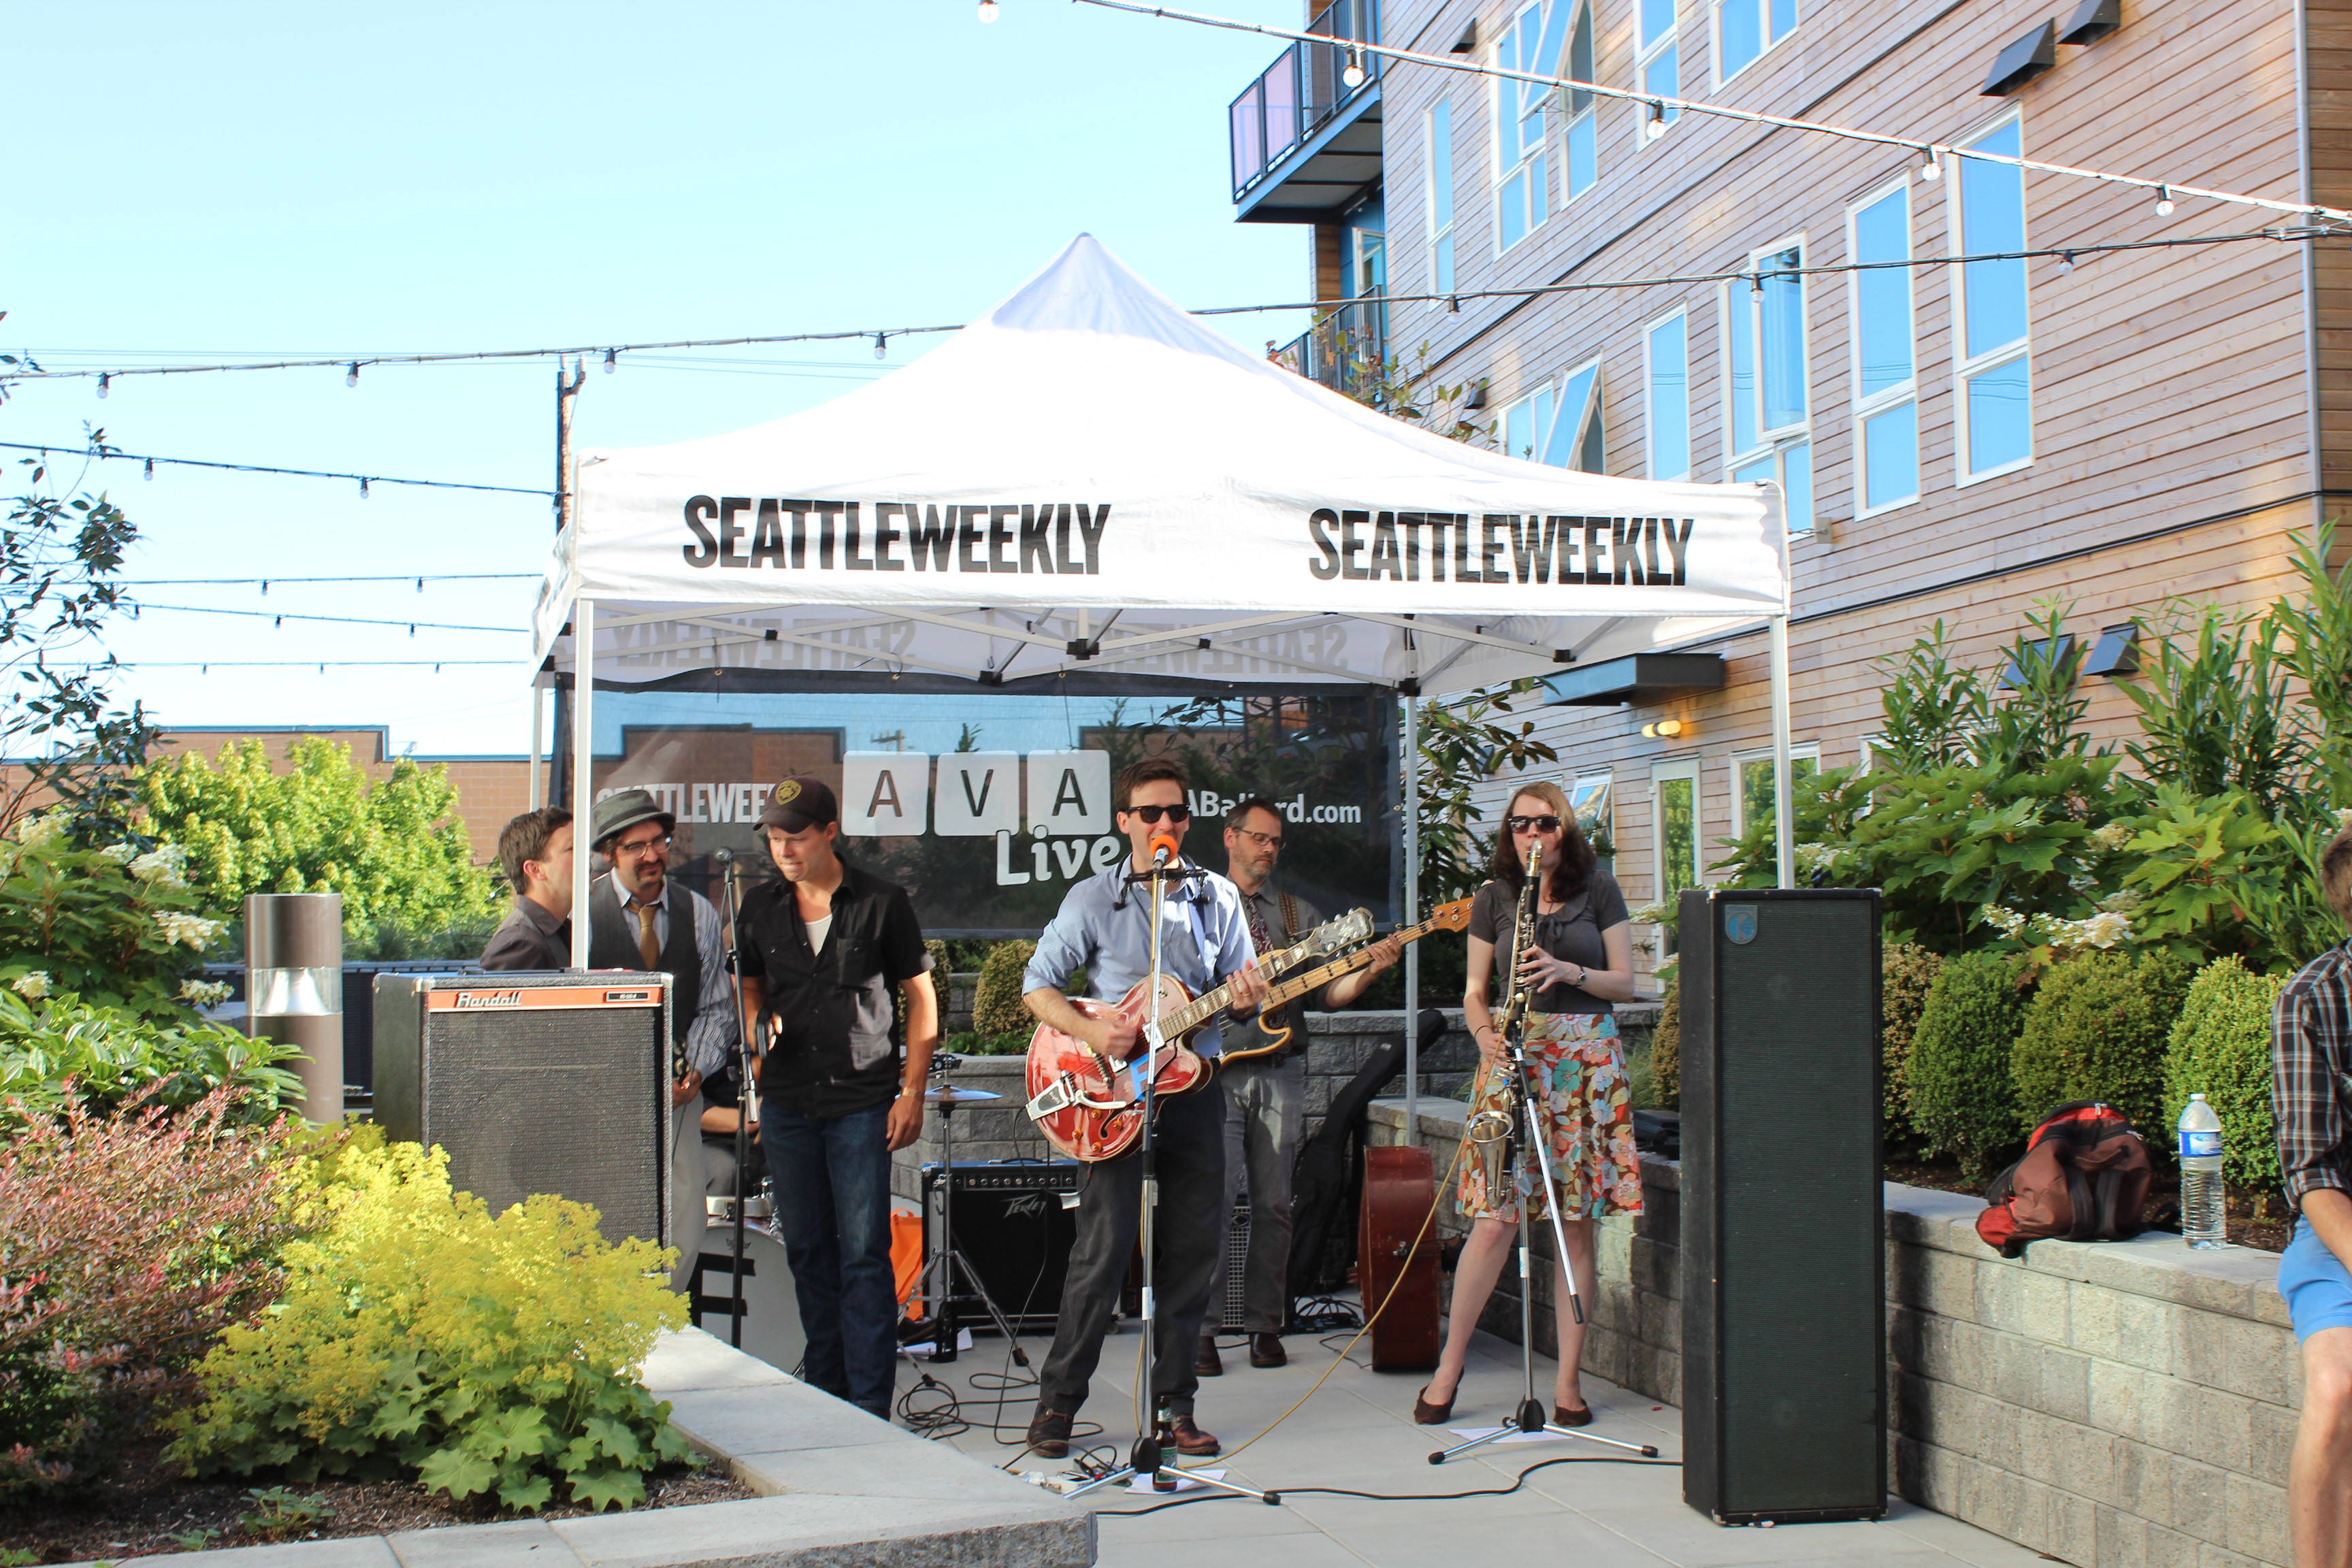 Seattle Weekly and AVA Ballard apartments teamed up to throw a bash